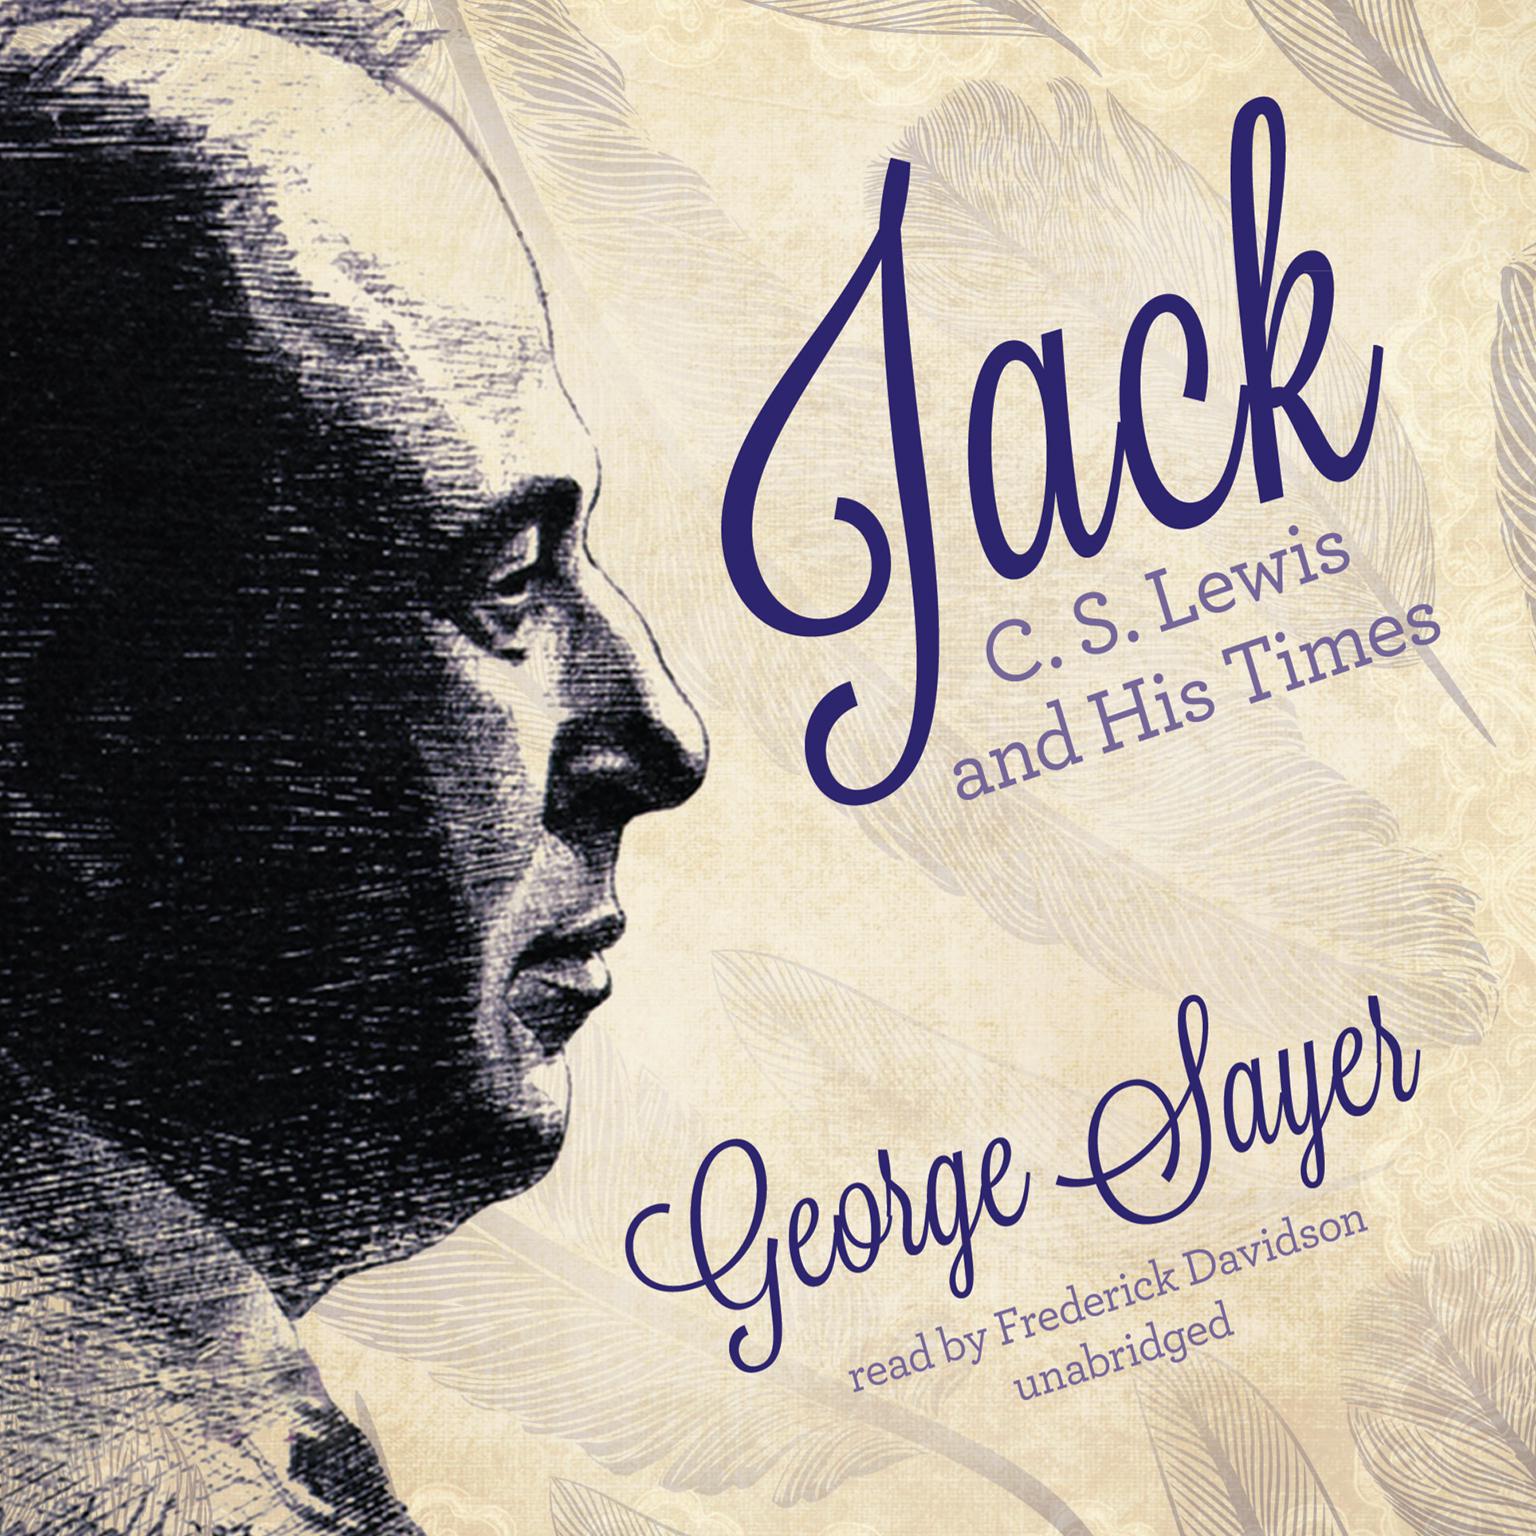 Jack: C. S. Lewis and His Times Audiobook, by George Sayer